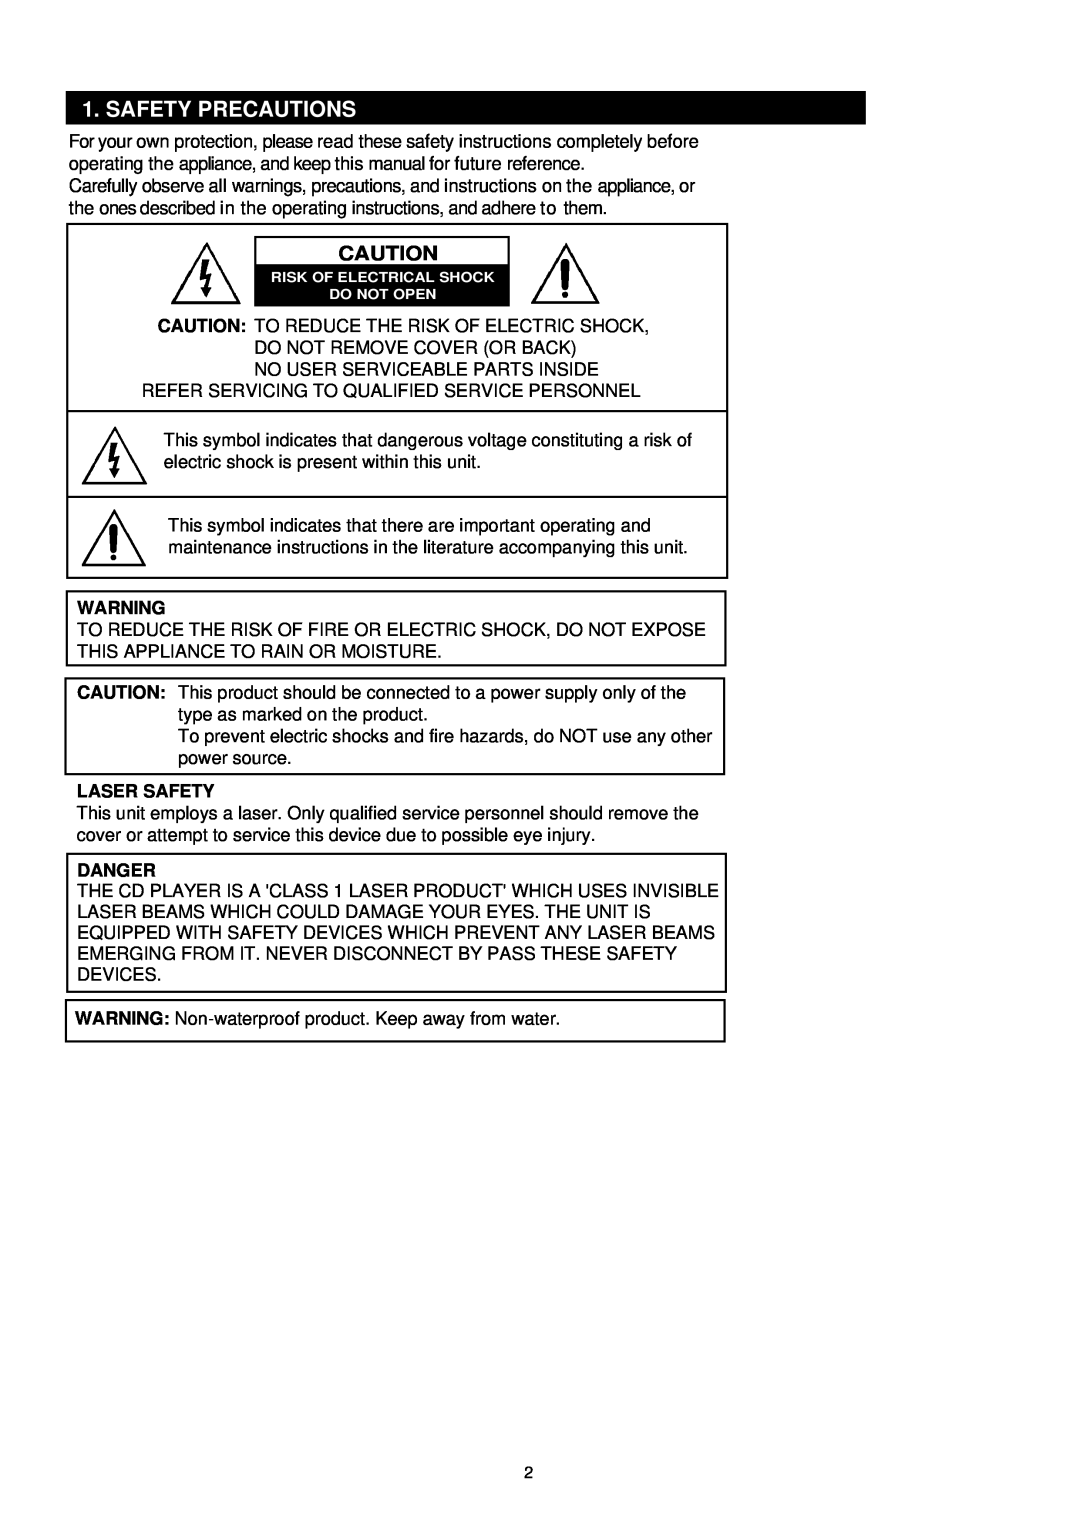 Palsonic PRC-510 instruction manual Safety Precautions, Laser Safety, Danger 